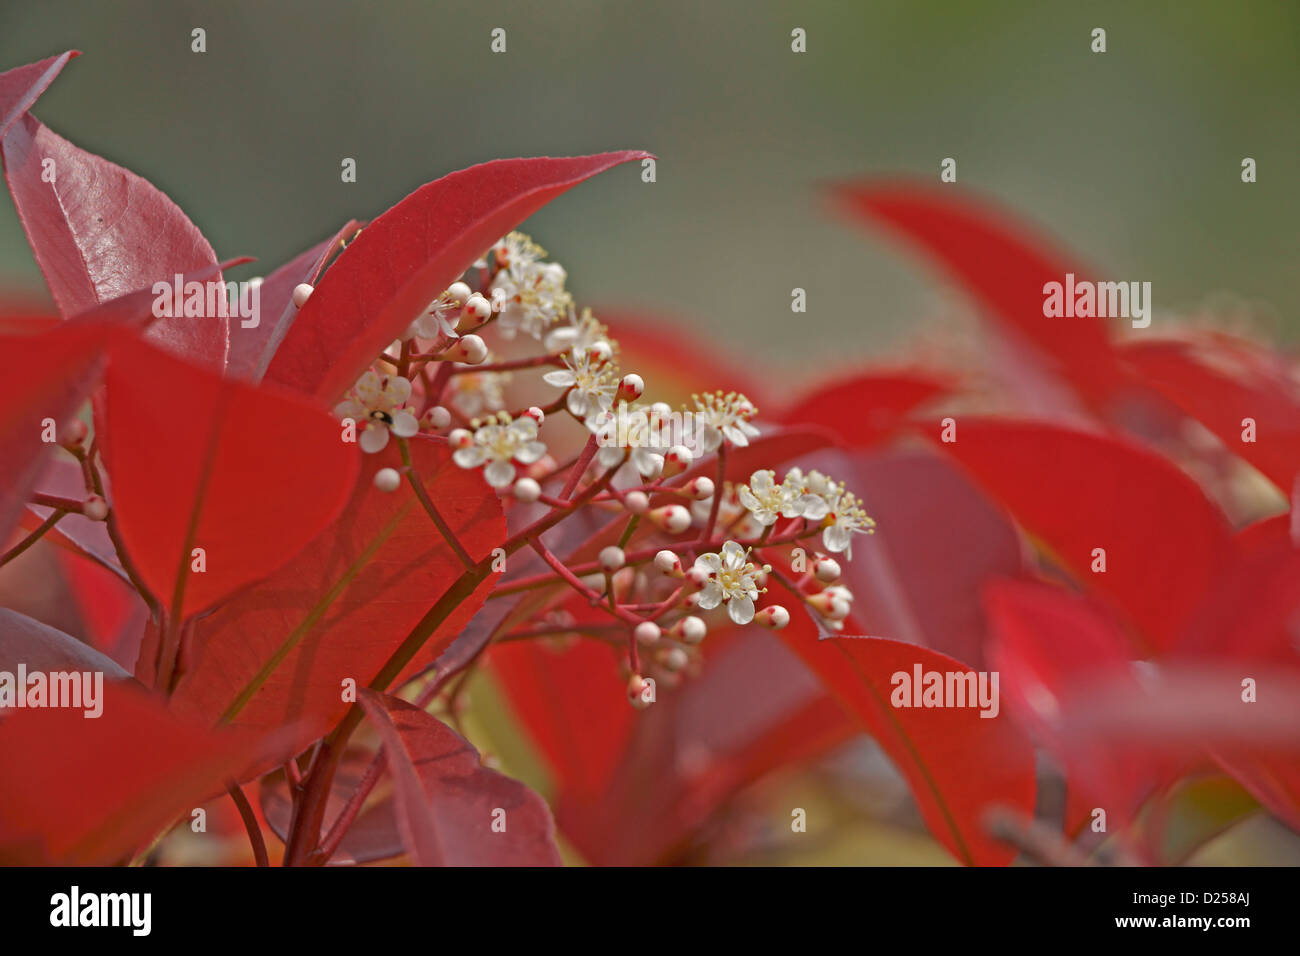 Japanese Photinia flowers and leaves Stock Photo